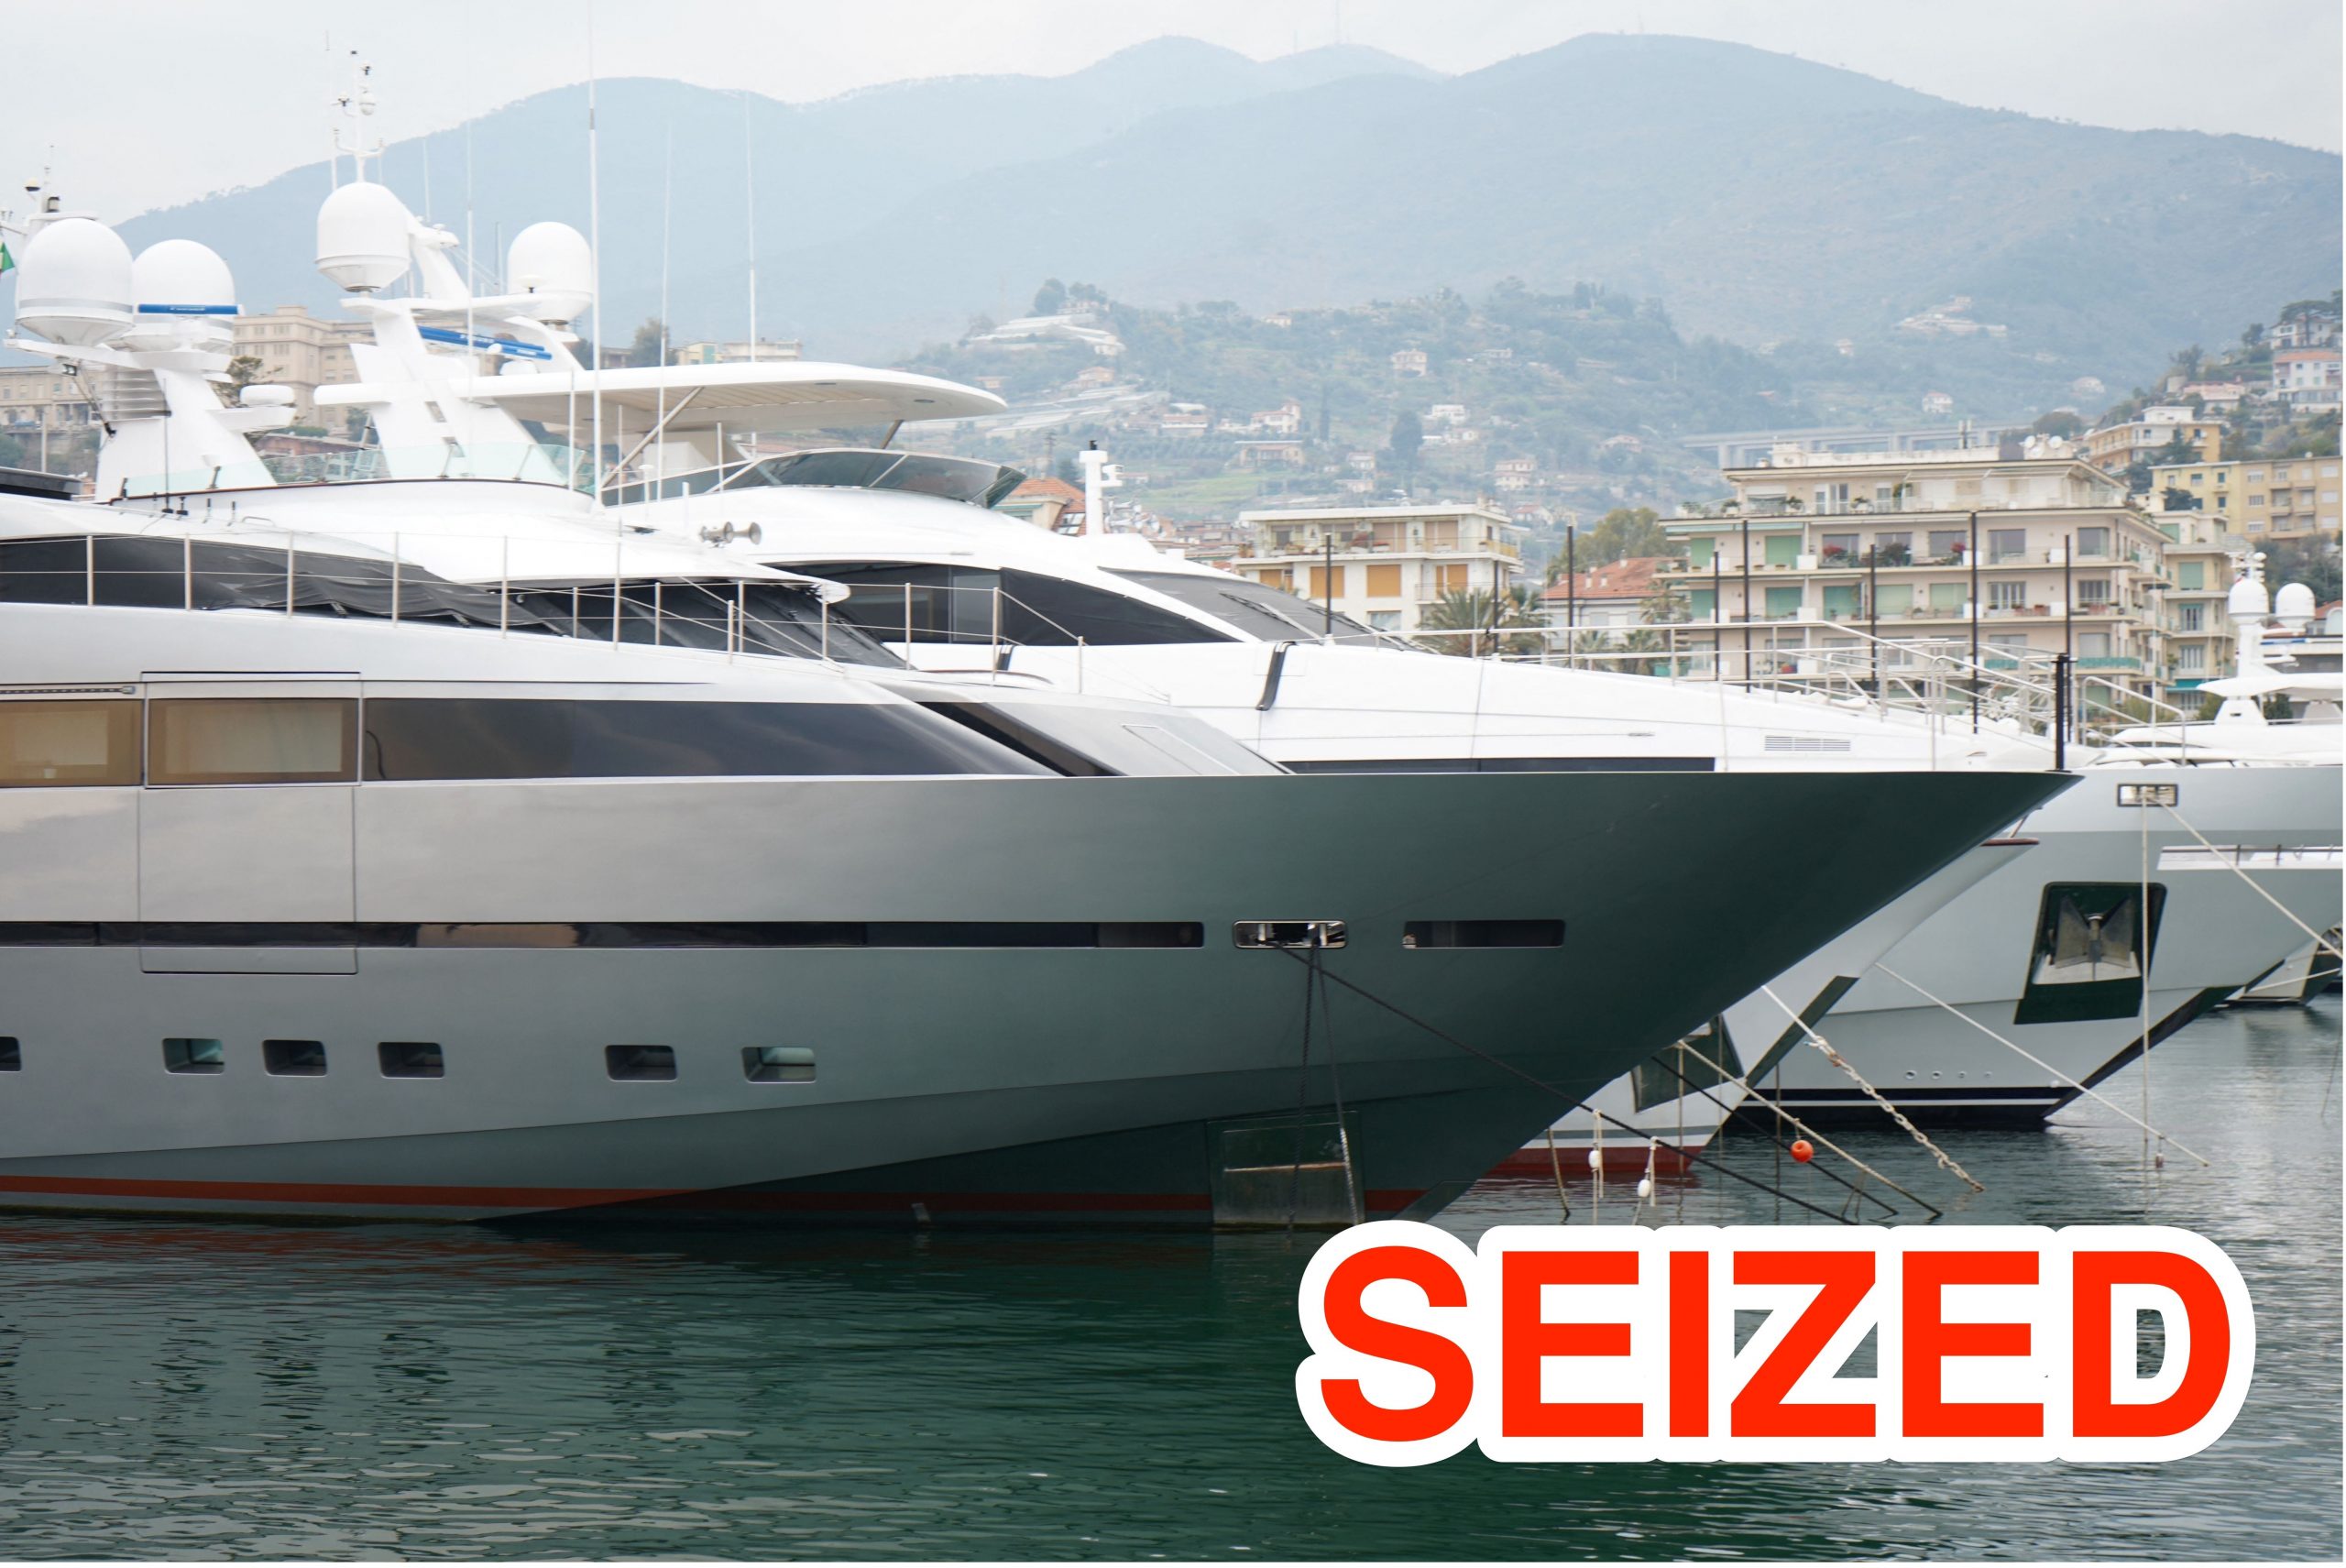 The superyacht &#34;Lena&#34; was seized in the port of San Remo, Italy on March 5.